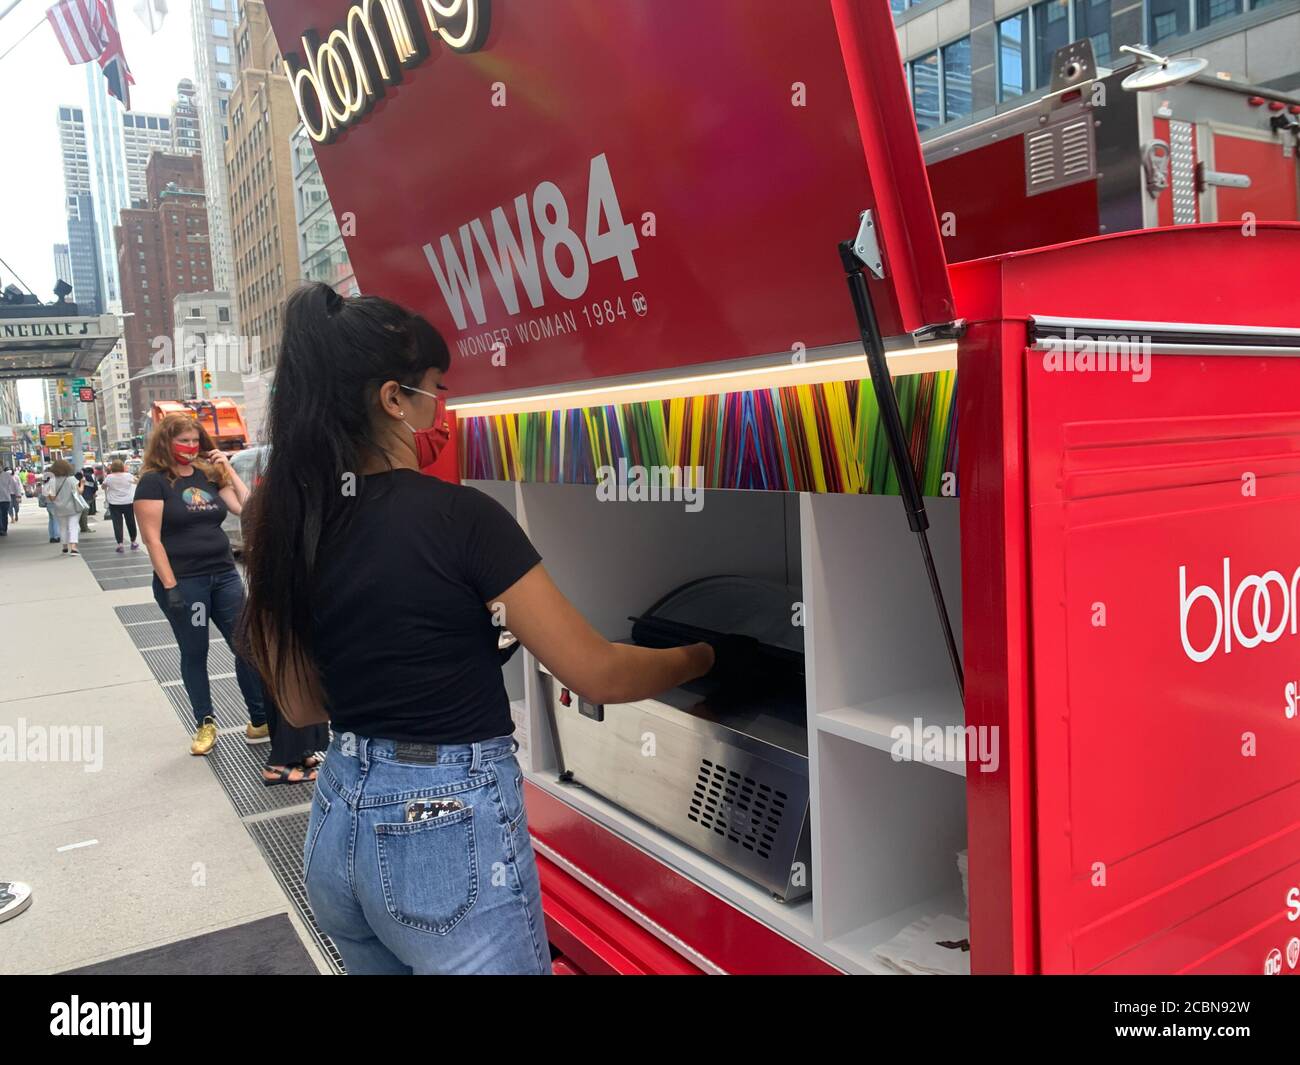 New York, USA. 14th Aug, 2020. (NEW) Free Ice Creams to promote Wonder Woman 1984 movie at Bloomingdales. August 14, 2020, New York, USA: Free ice creams are given out to people in front of Bloomingdales on Lexington Avenue in an effort to promote the movie Wonder Woman 1984 (WW84). The movie products are been exhibited inside Bloomingdales.Credit : Niyi Fote /Thenews2 Credit: Niyi Fote/TheNEWS2/ZUMA Wire/Alamy Live News Stock Photo